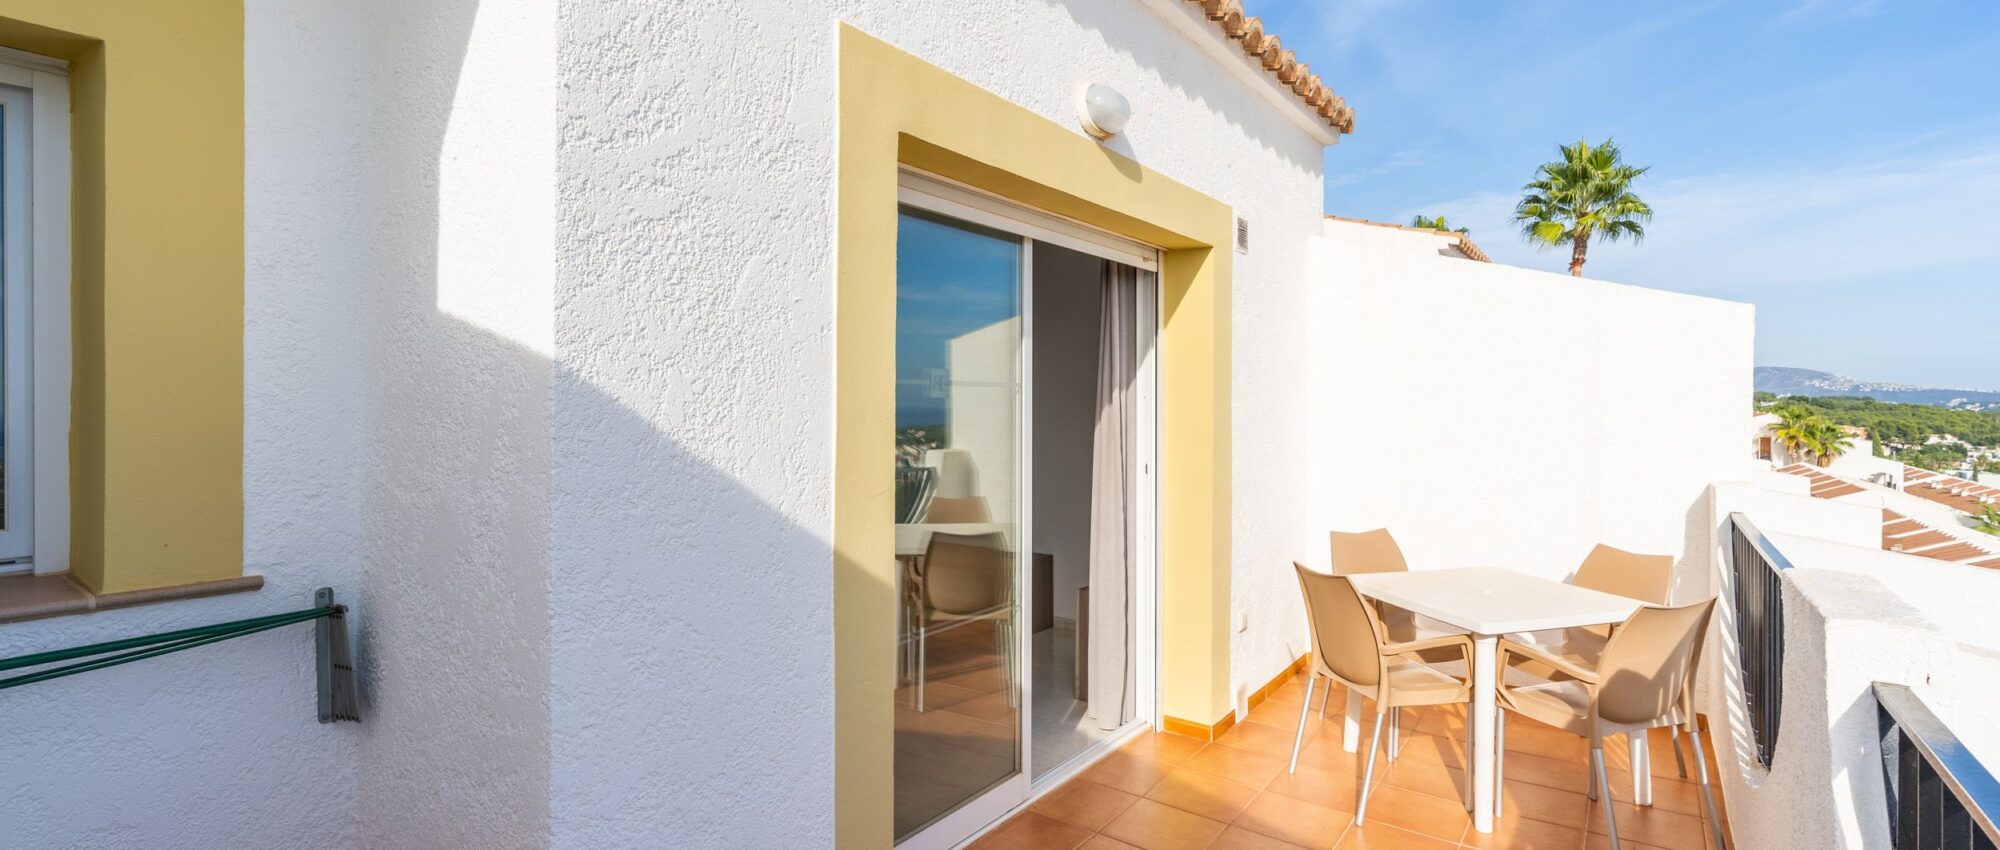 Development of bungalows located in a quiet residential area with spectacular views of the Mediterranean Sea and the Peñón de Ifach. Townhouses with 1, 2, and 3 bedrooms.